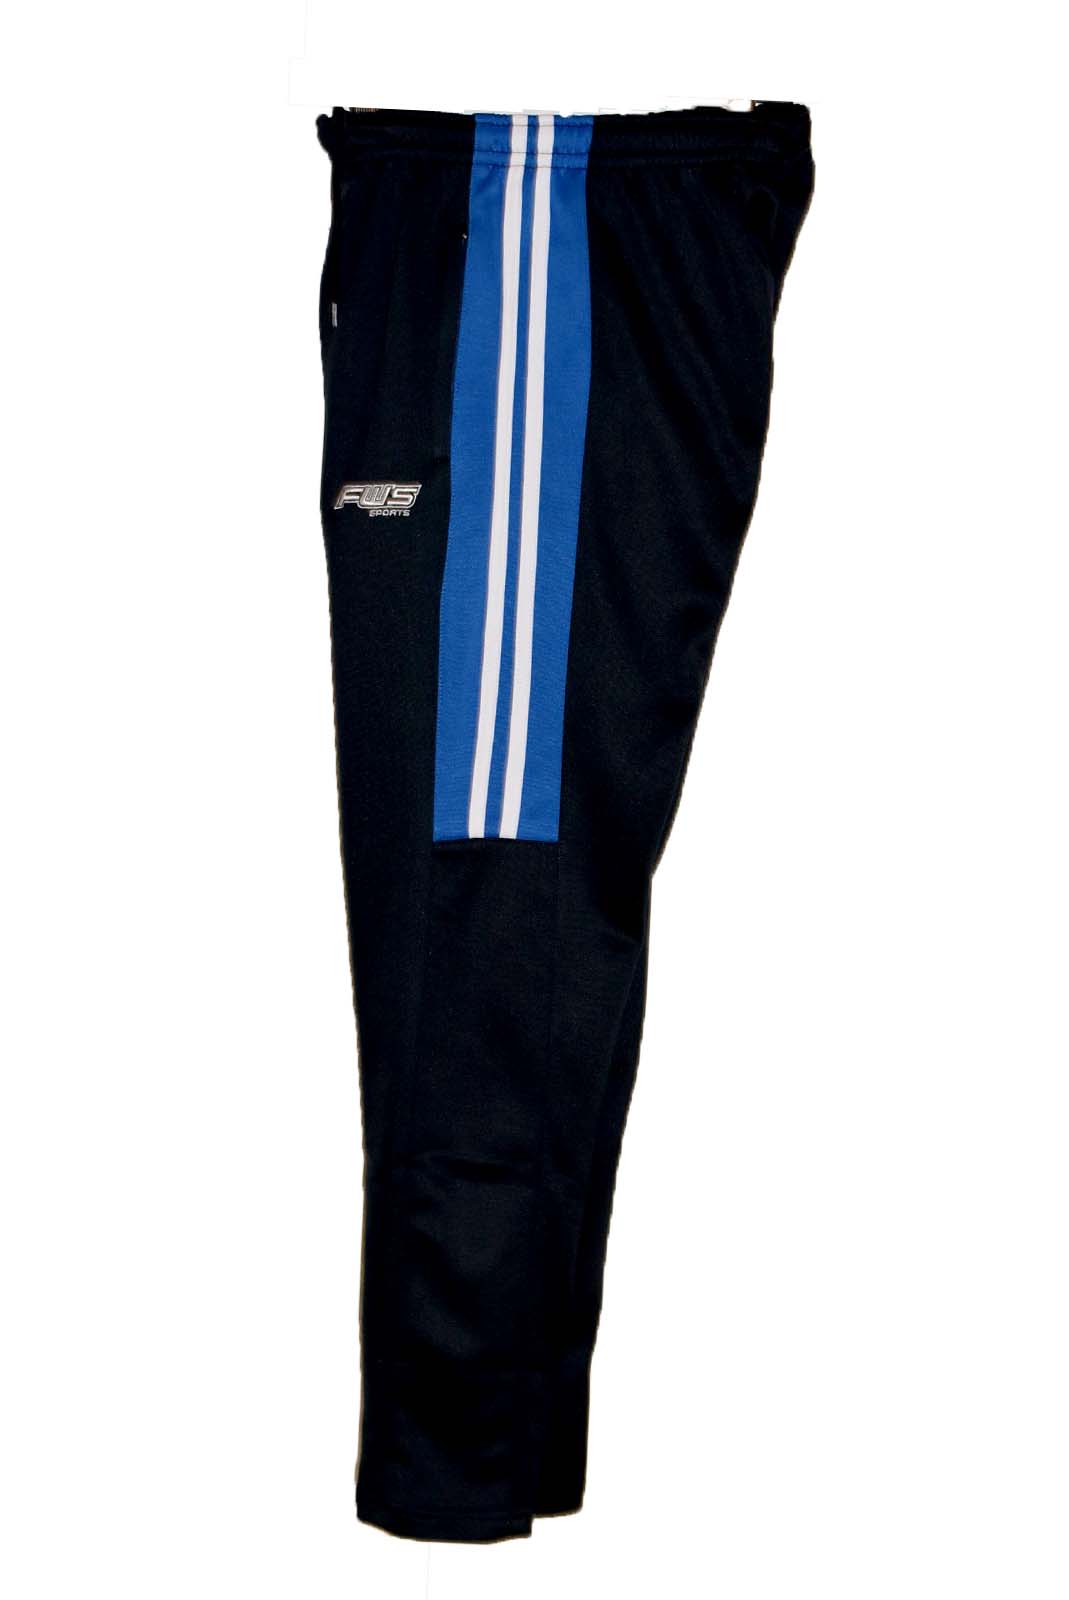 MEN BLACK AND NAVY COMPLETE TRACK SUIT